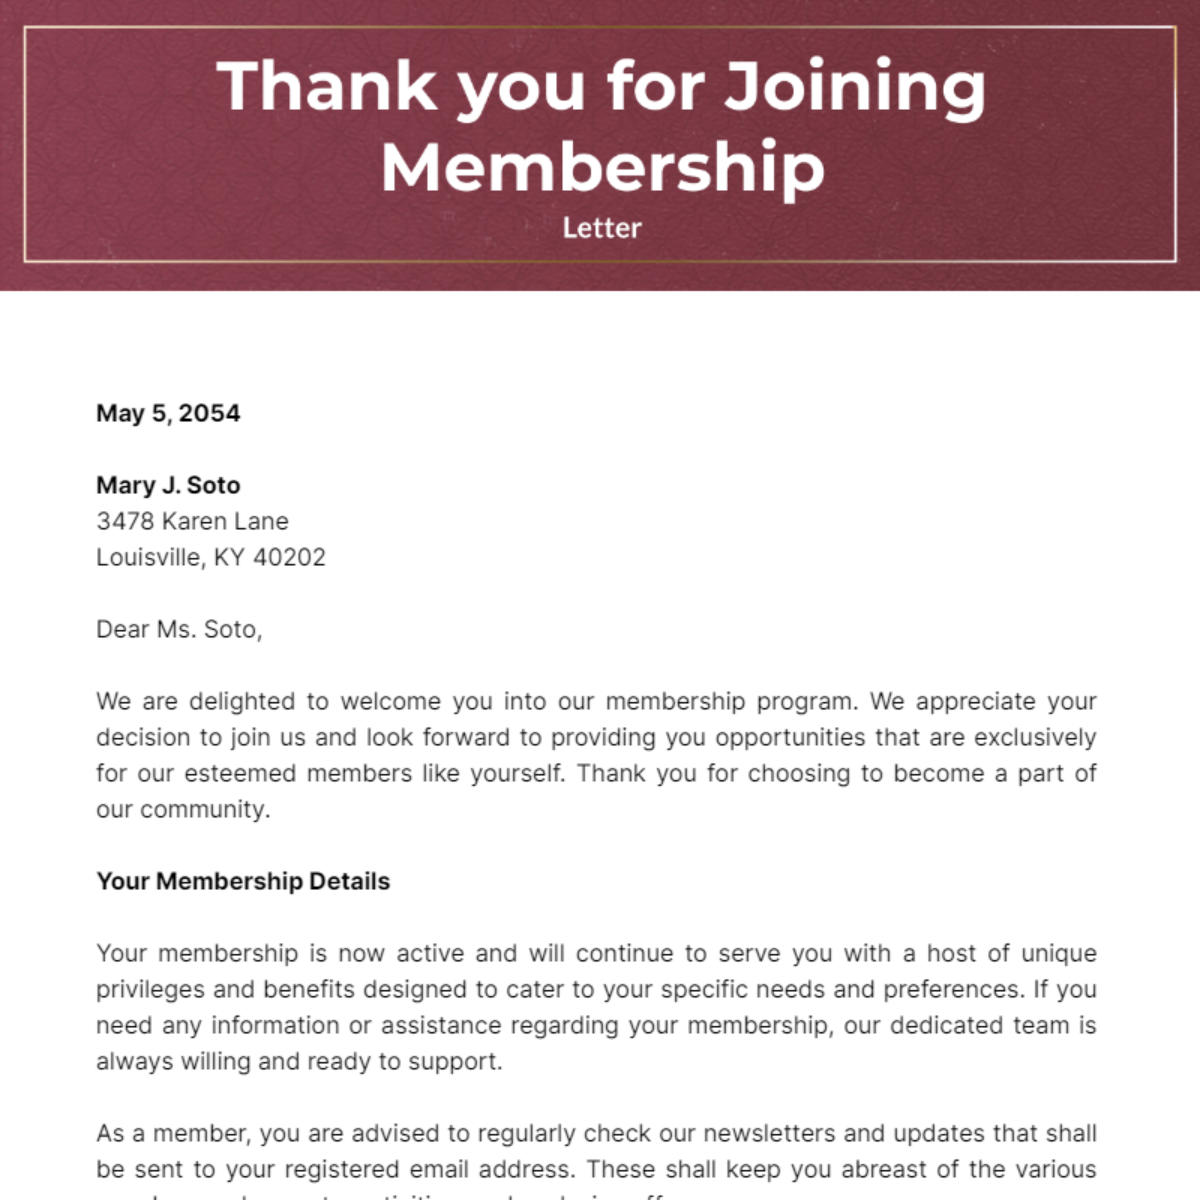 Thank you for Joining Membership Letter Template